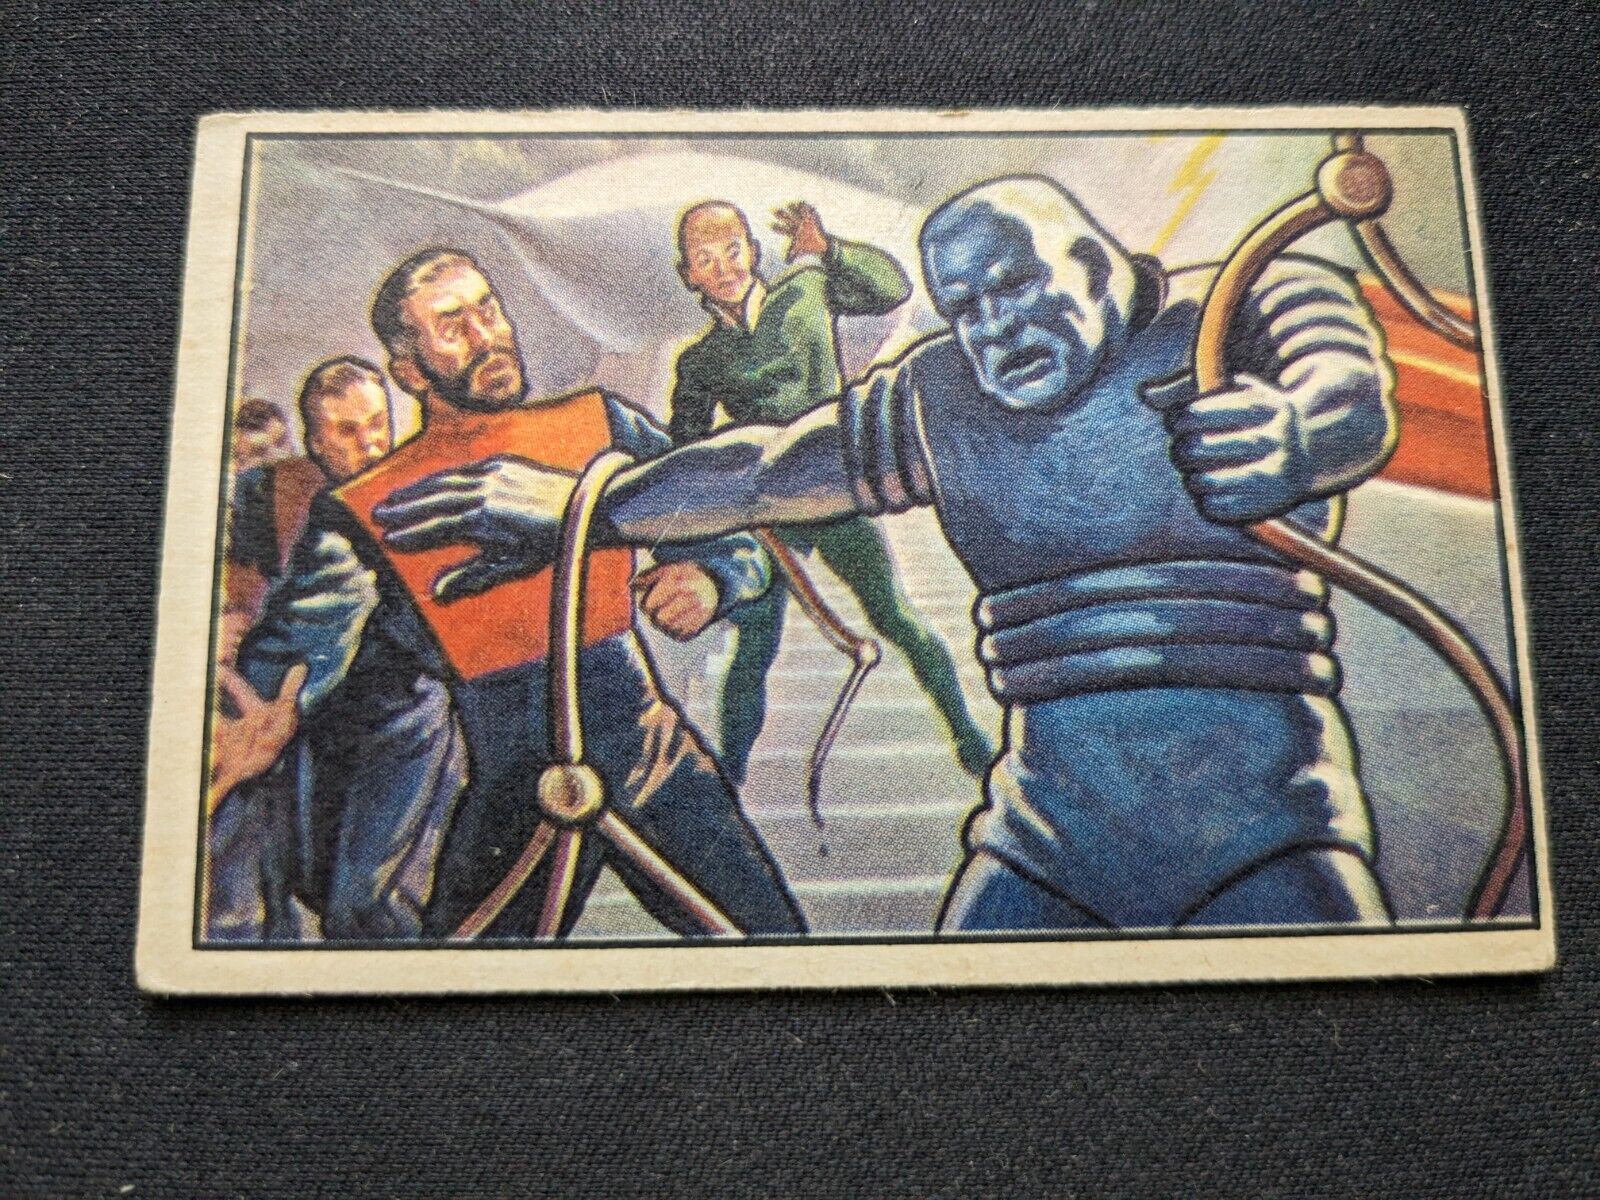 1951 Bowman Jets, Rockets & Spacemen # 105 Malpo the Mighty (VG/EX)